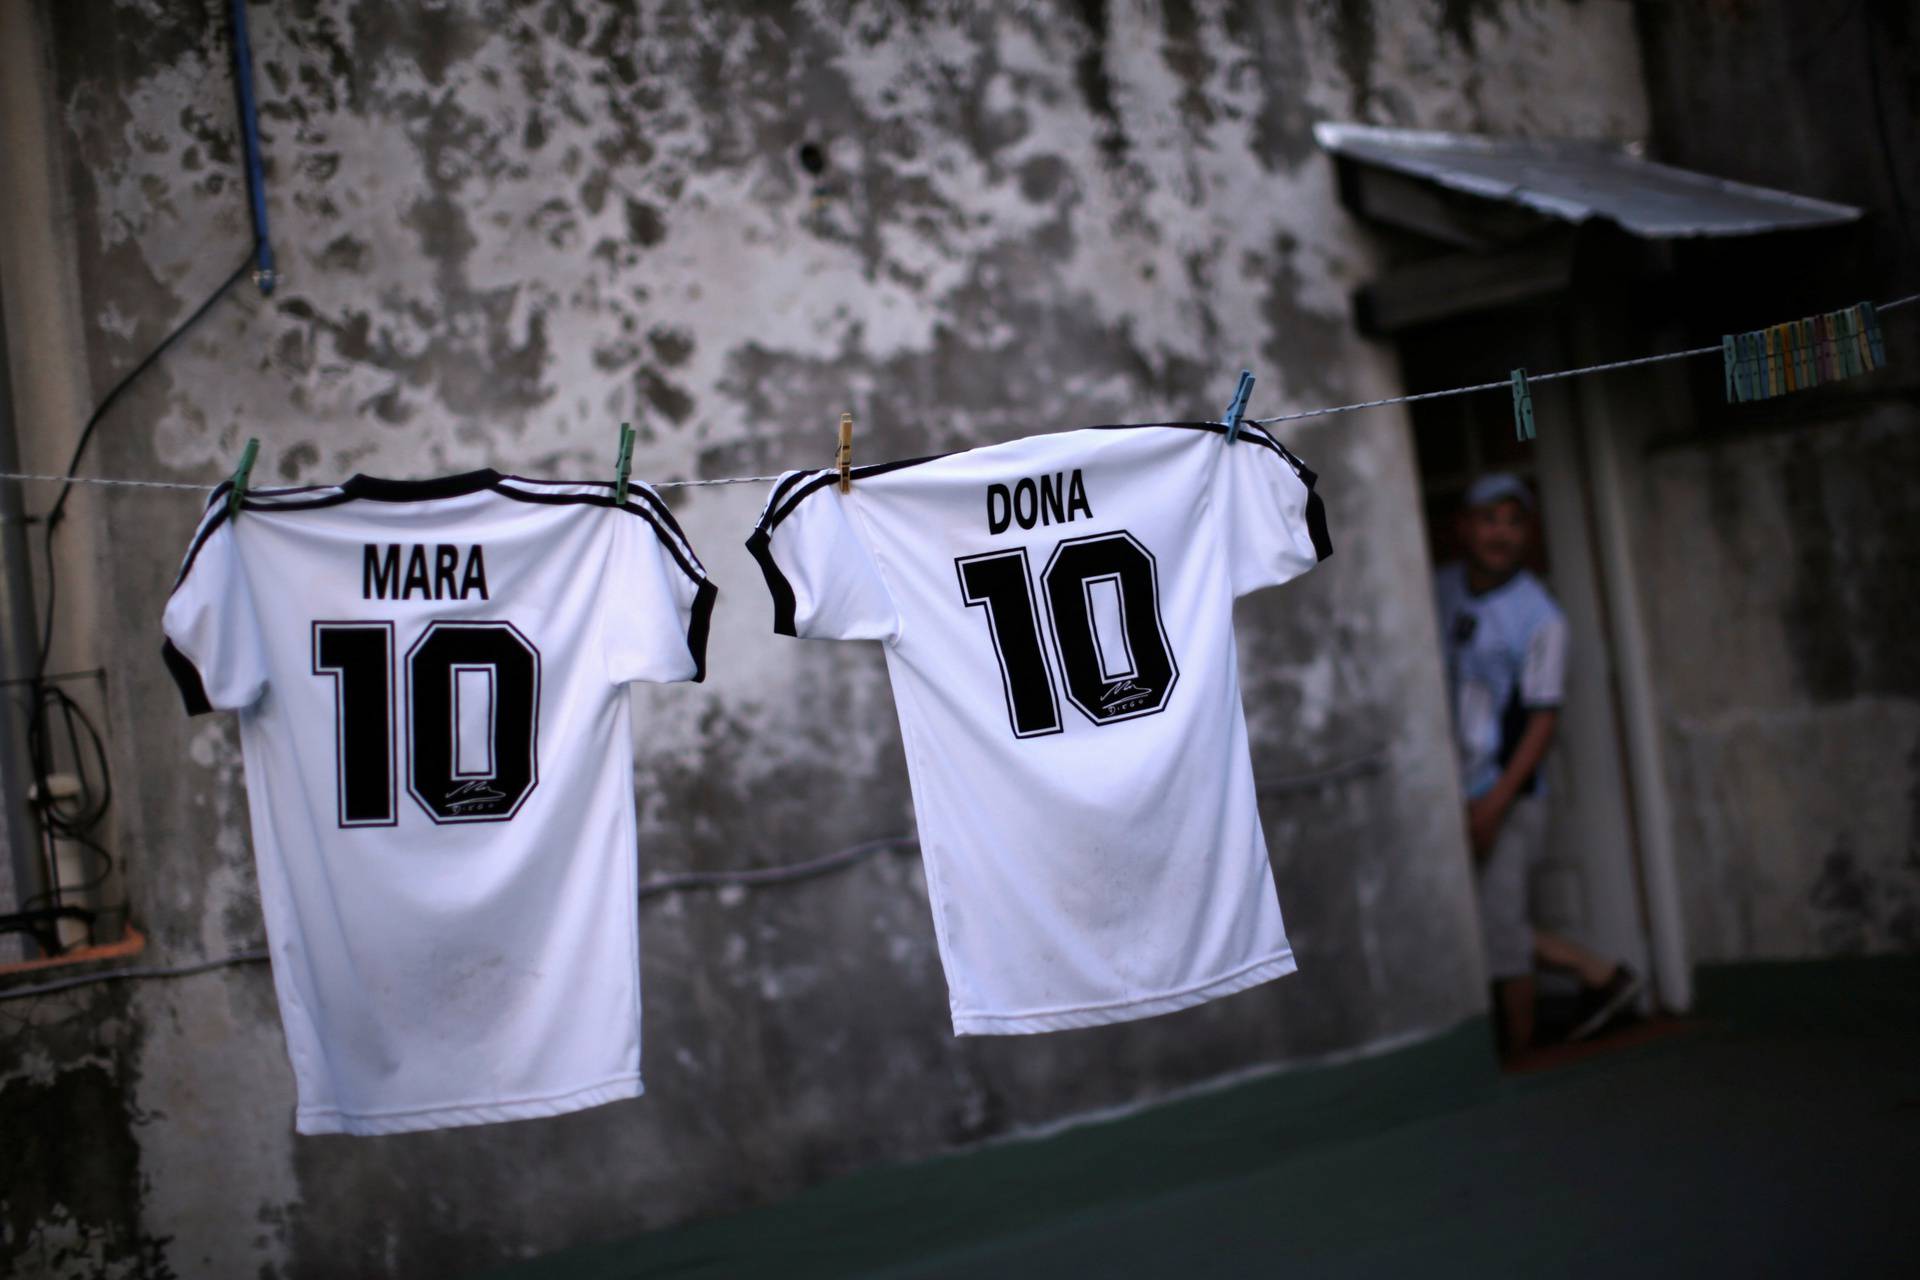 T-shirts with the names of Mara and Dona, twin daughters of Walter Gaston Rotundo, a devoted Diego Maradona fan that named his daughters after the soccer star, are seen on the clothesline at the family house, in Buenos Aires